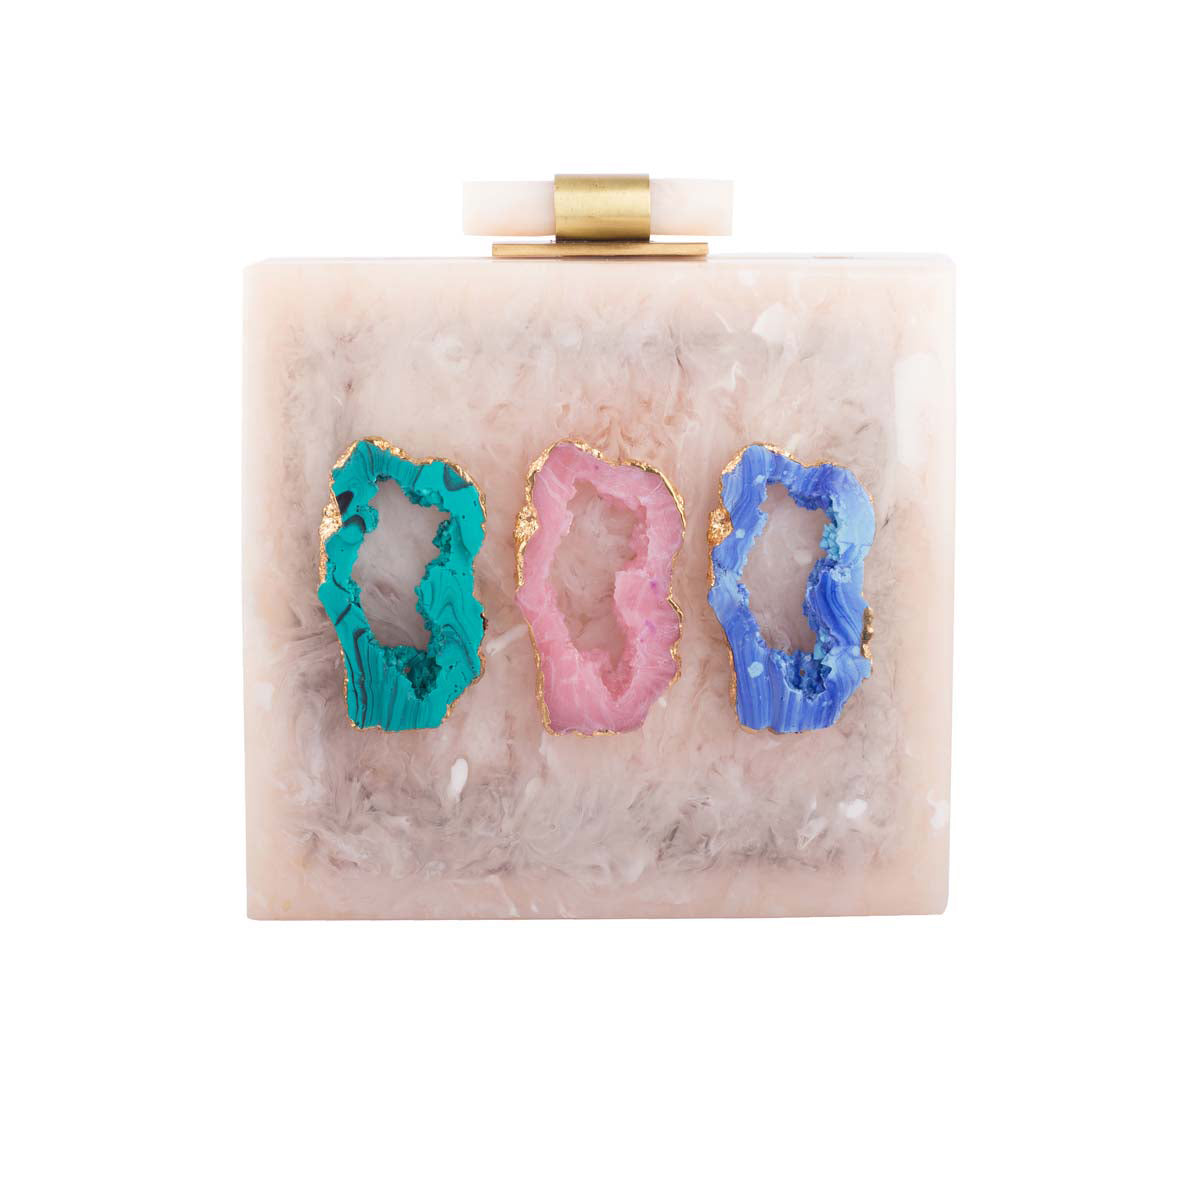 From a pooja to a pool party, this stunning pastel-palette lucite clutch has three moon rock stones to add an eccentric edge to a classic colour.